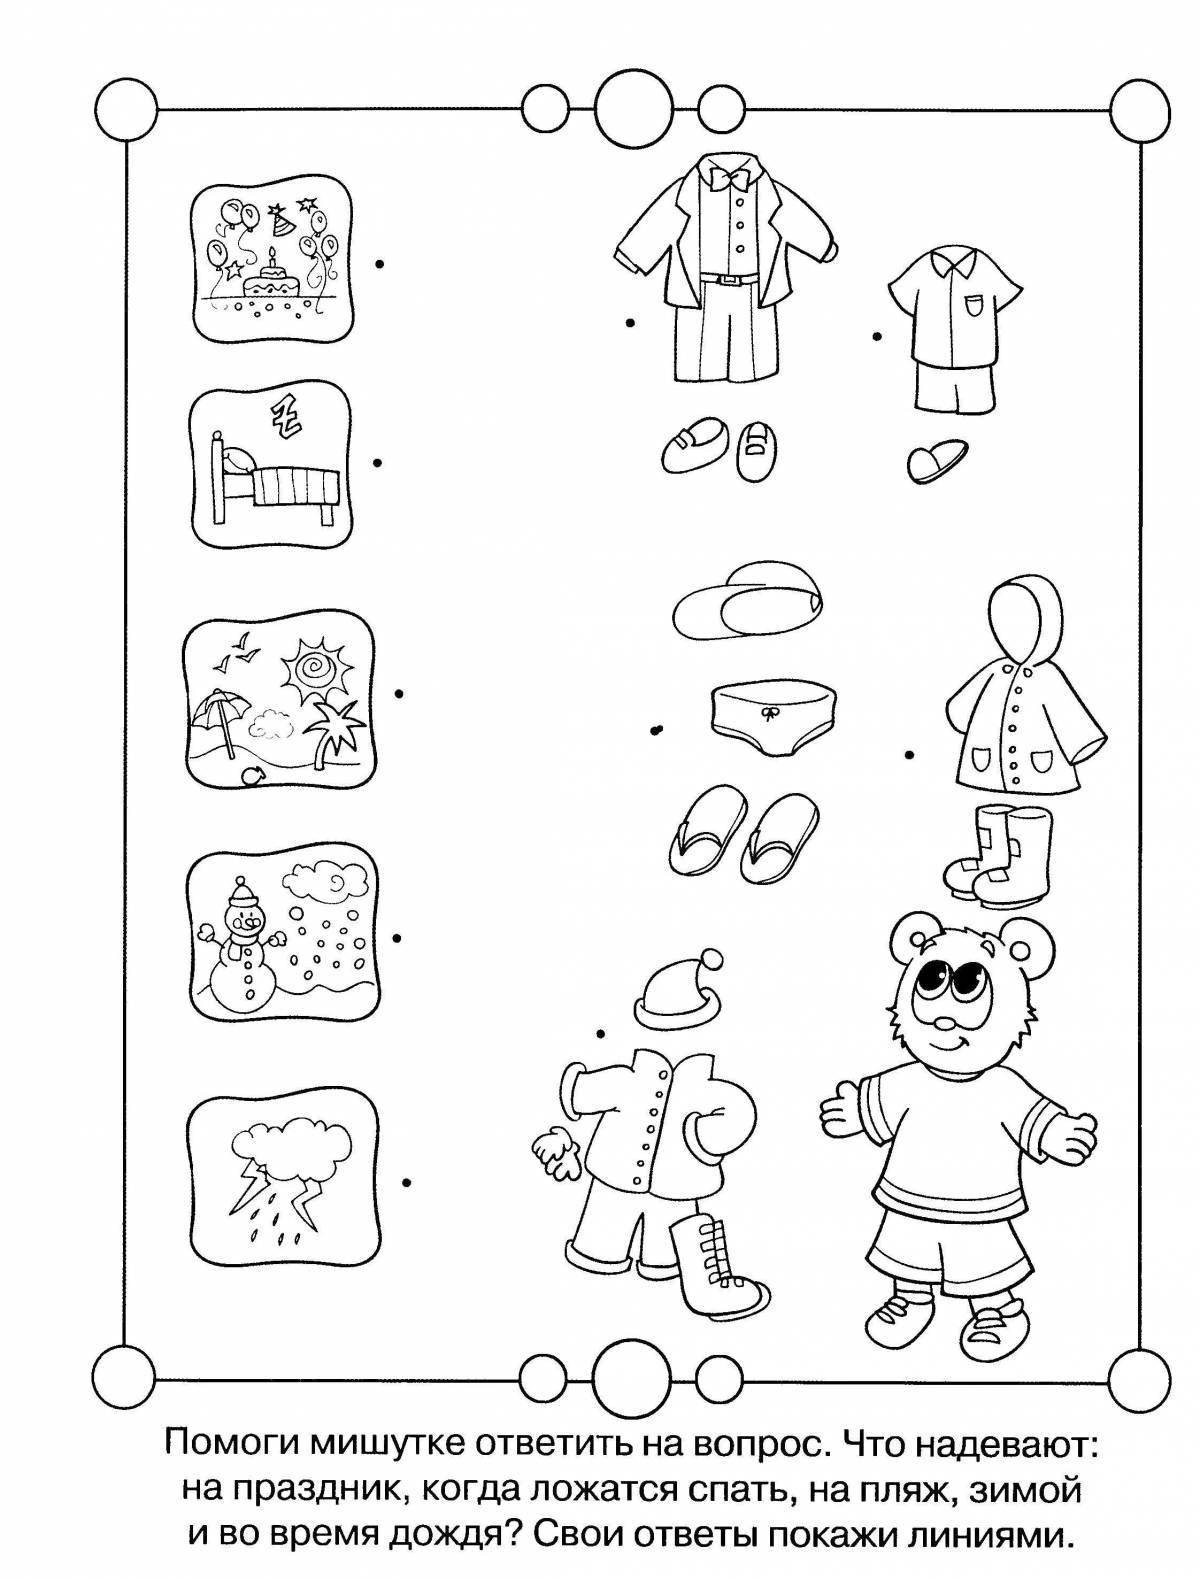 Creative puzzle coloring book for 3-4 year olds